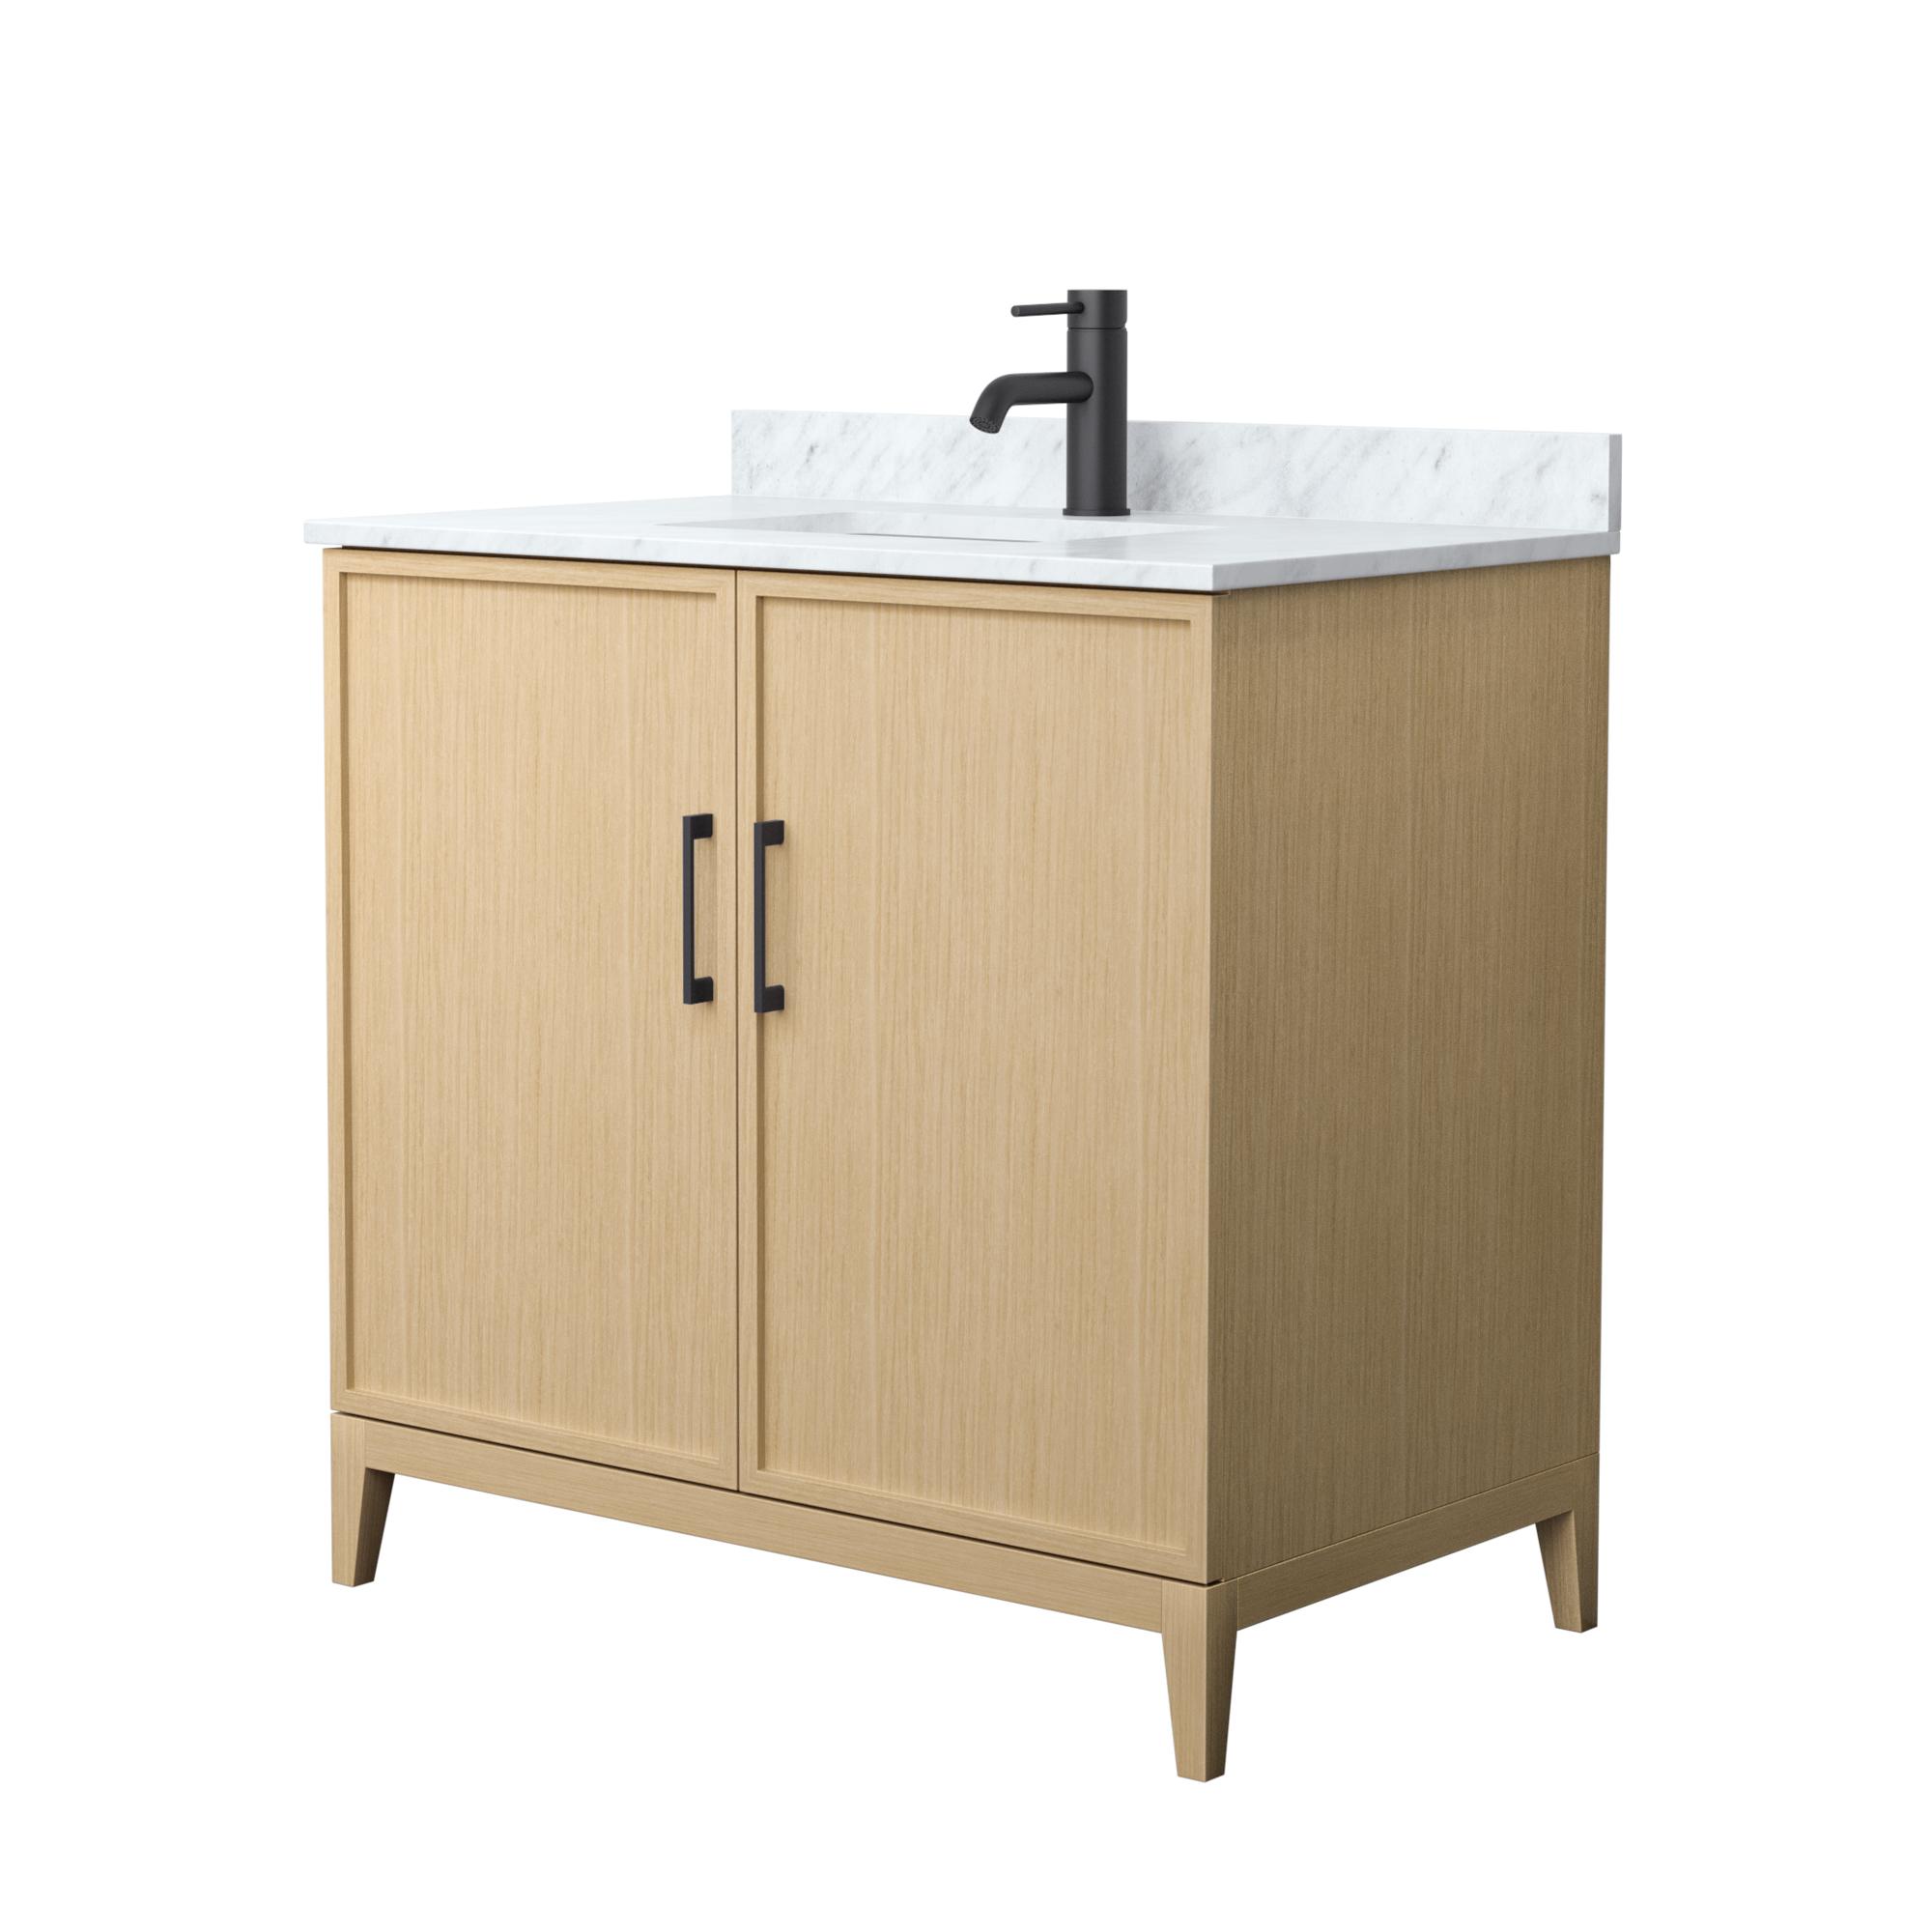 36" Transitional Single Vanity Base in White Oak, 7 Top Options with 2 Hardware Option